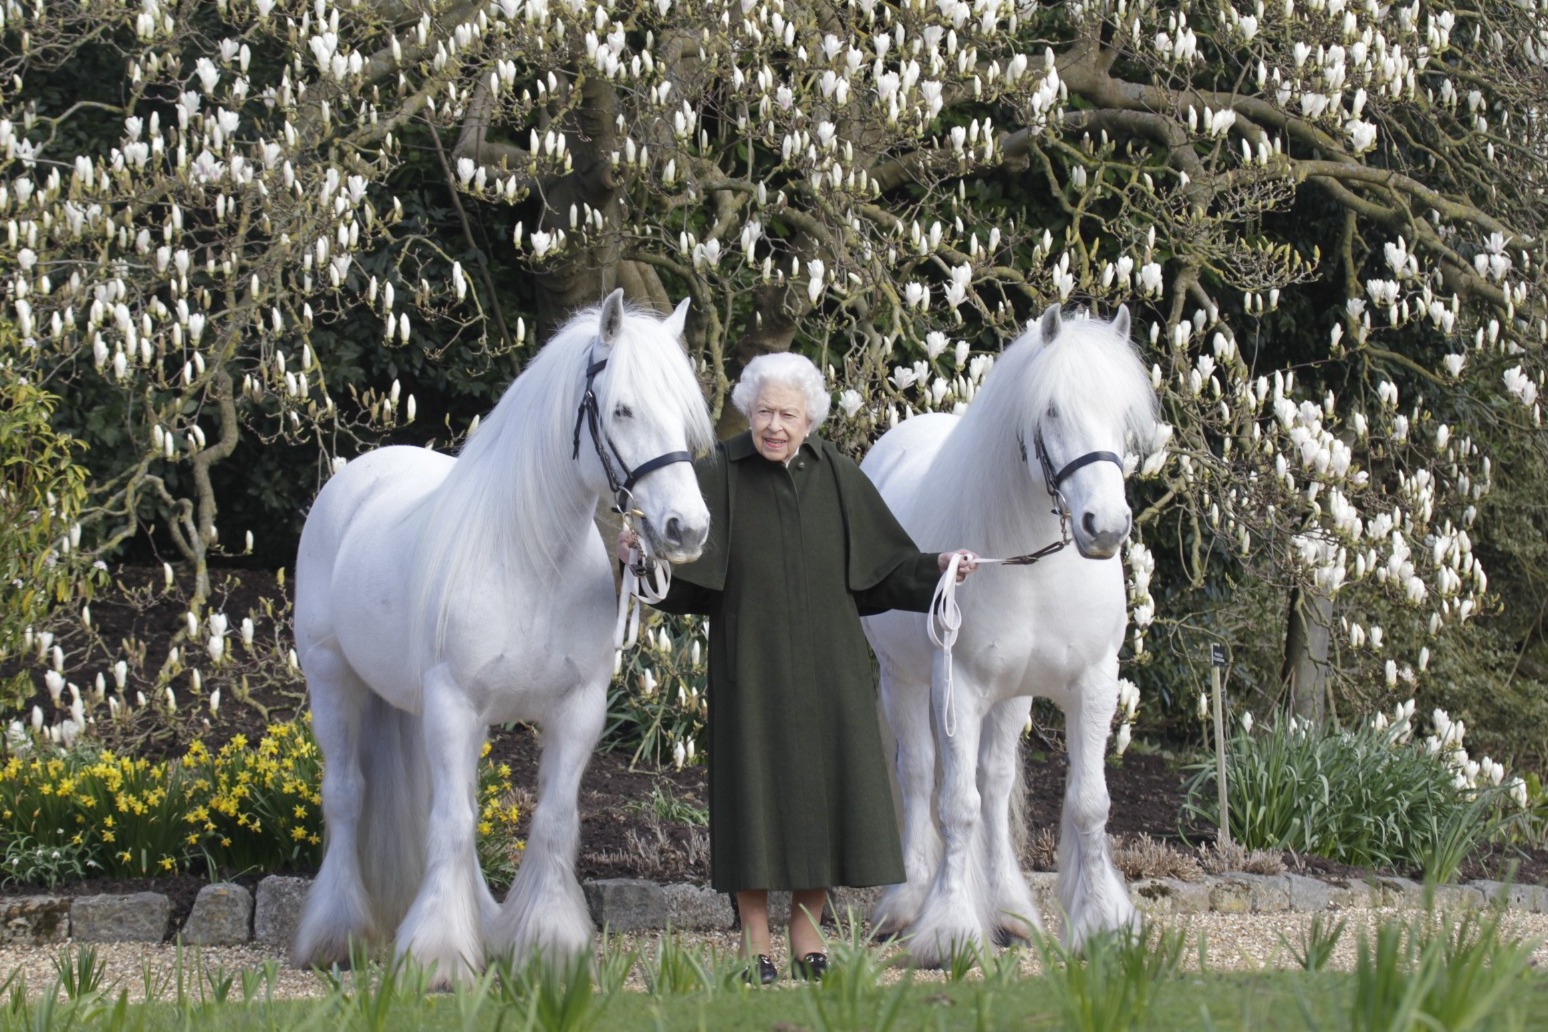 Queen’s 96th birthday celebrated with release of new photograph 